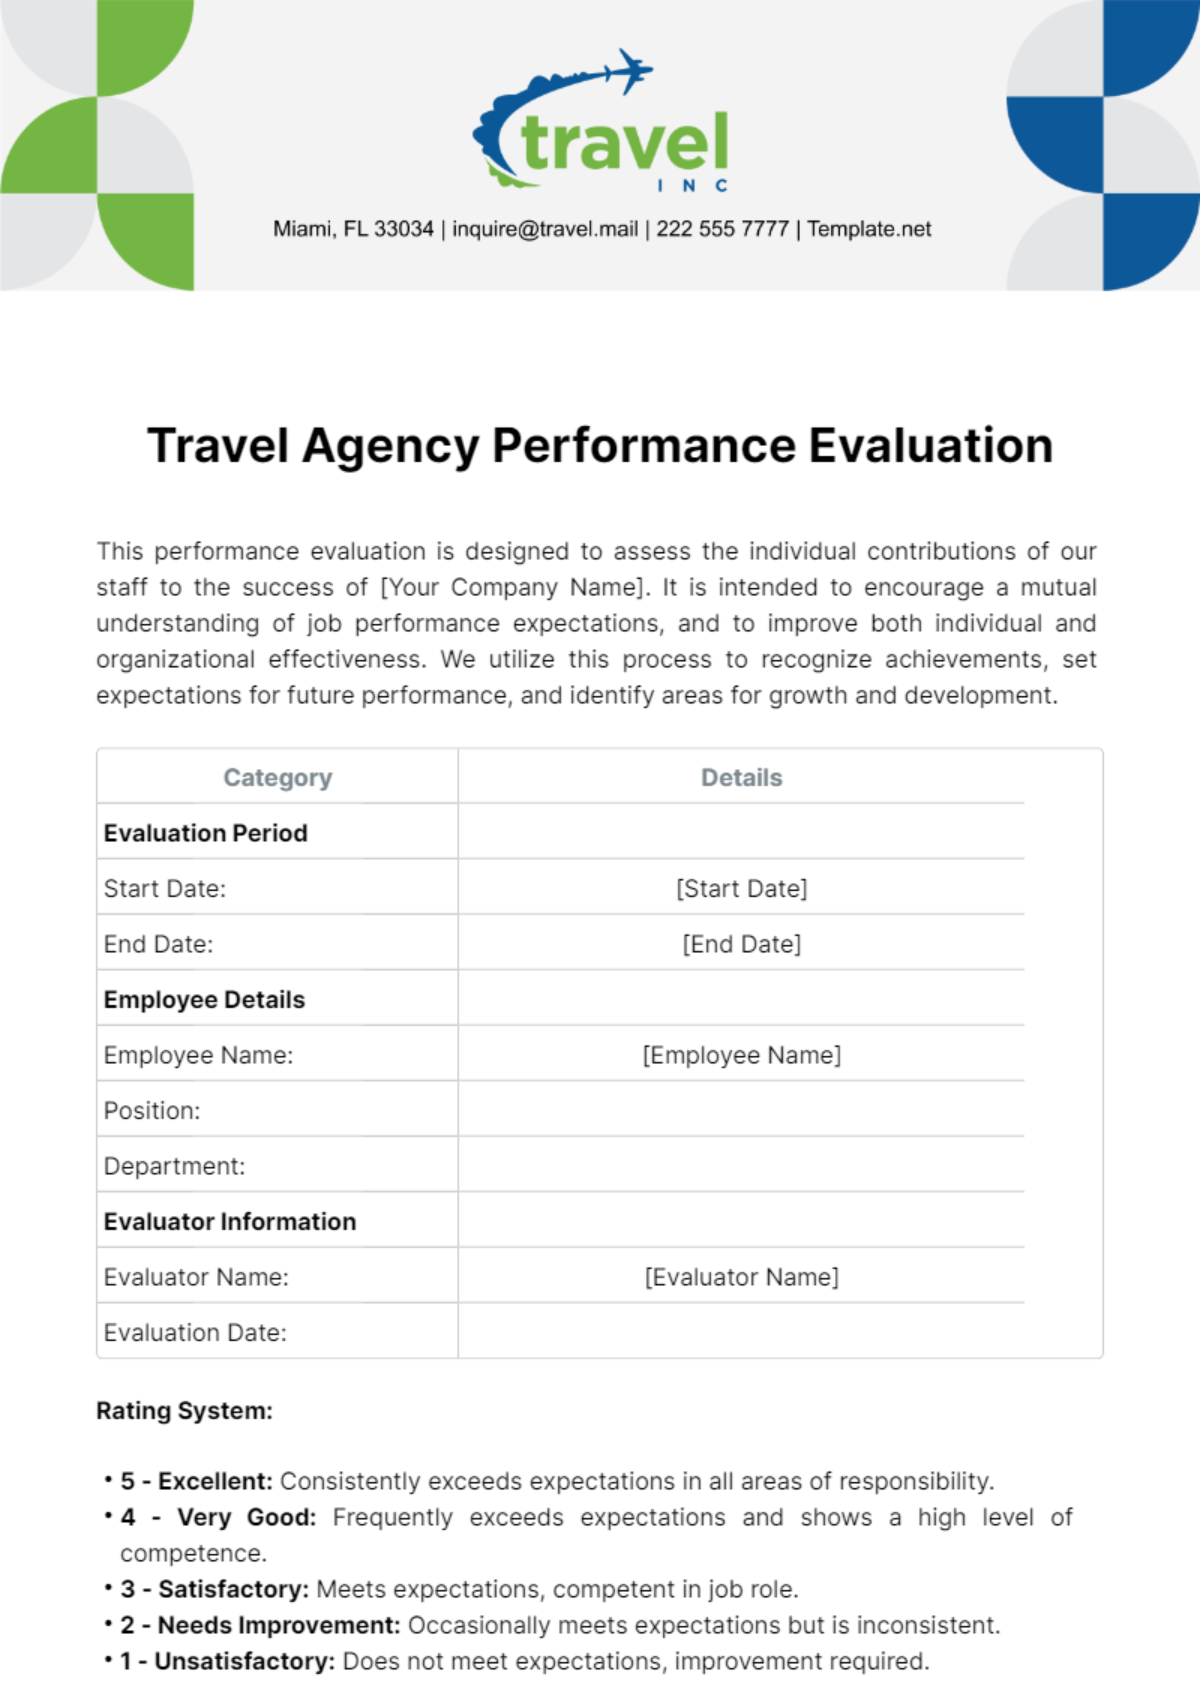 Travel Agency Performance Evaluation Template